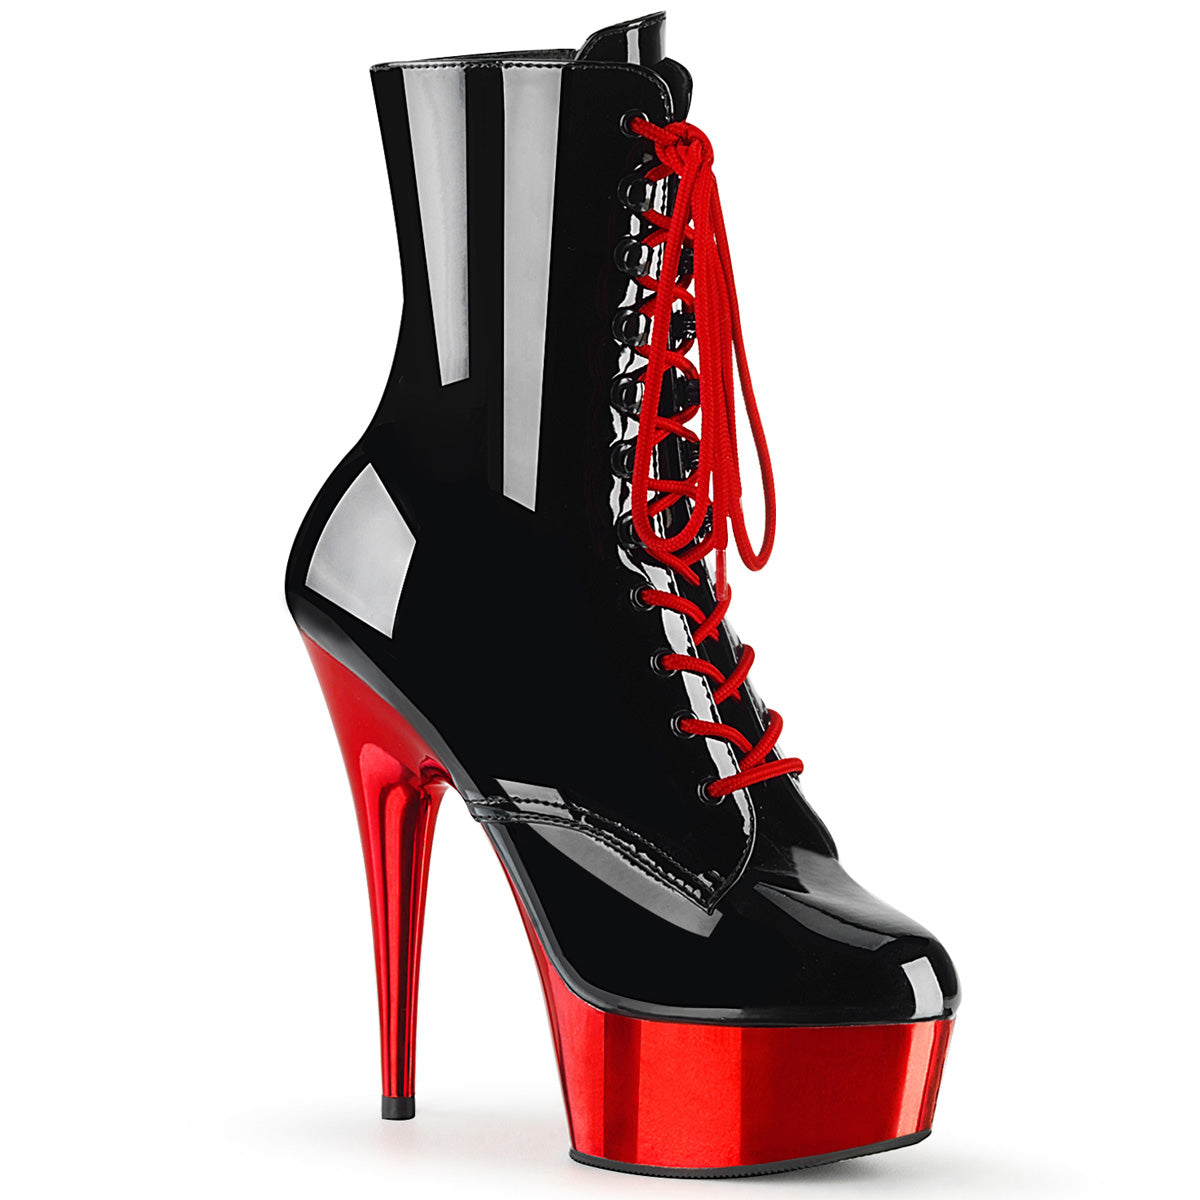 DELIGHT-1020 Black & Red Calf High Boots